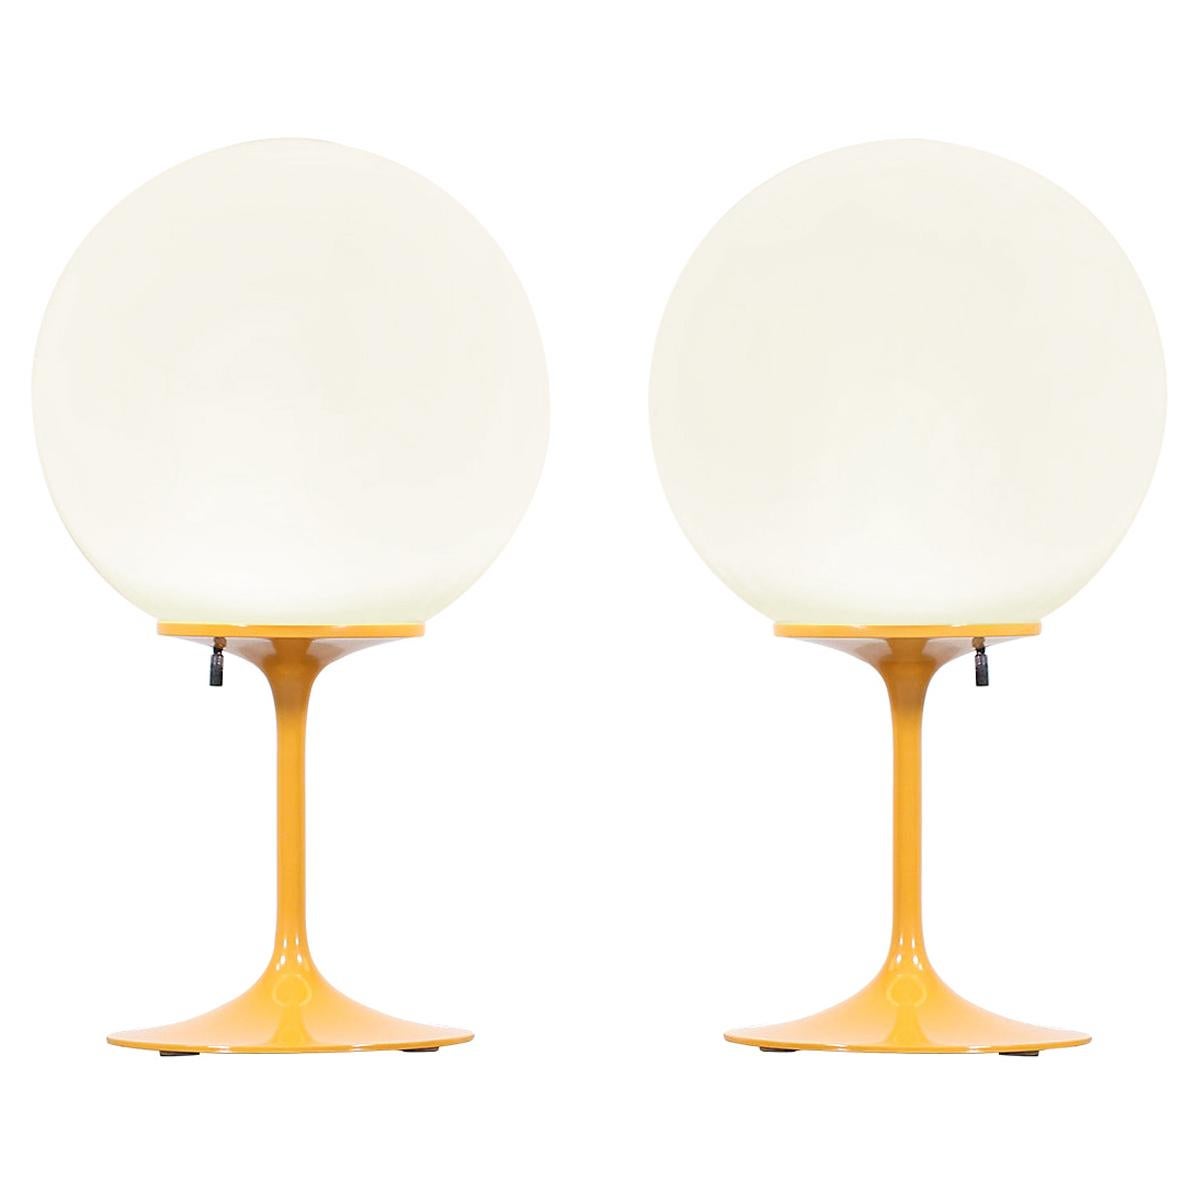 Bill Curry "Stemlite" Mustard Table Lamps for Design Line